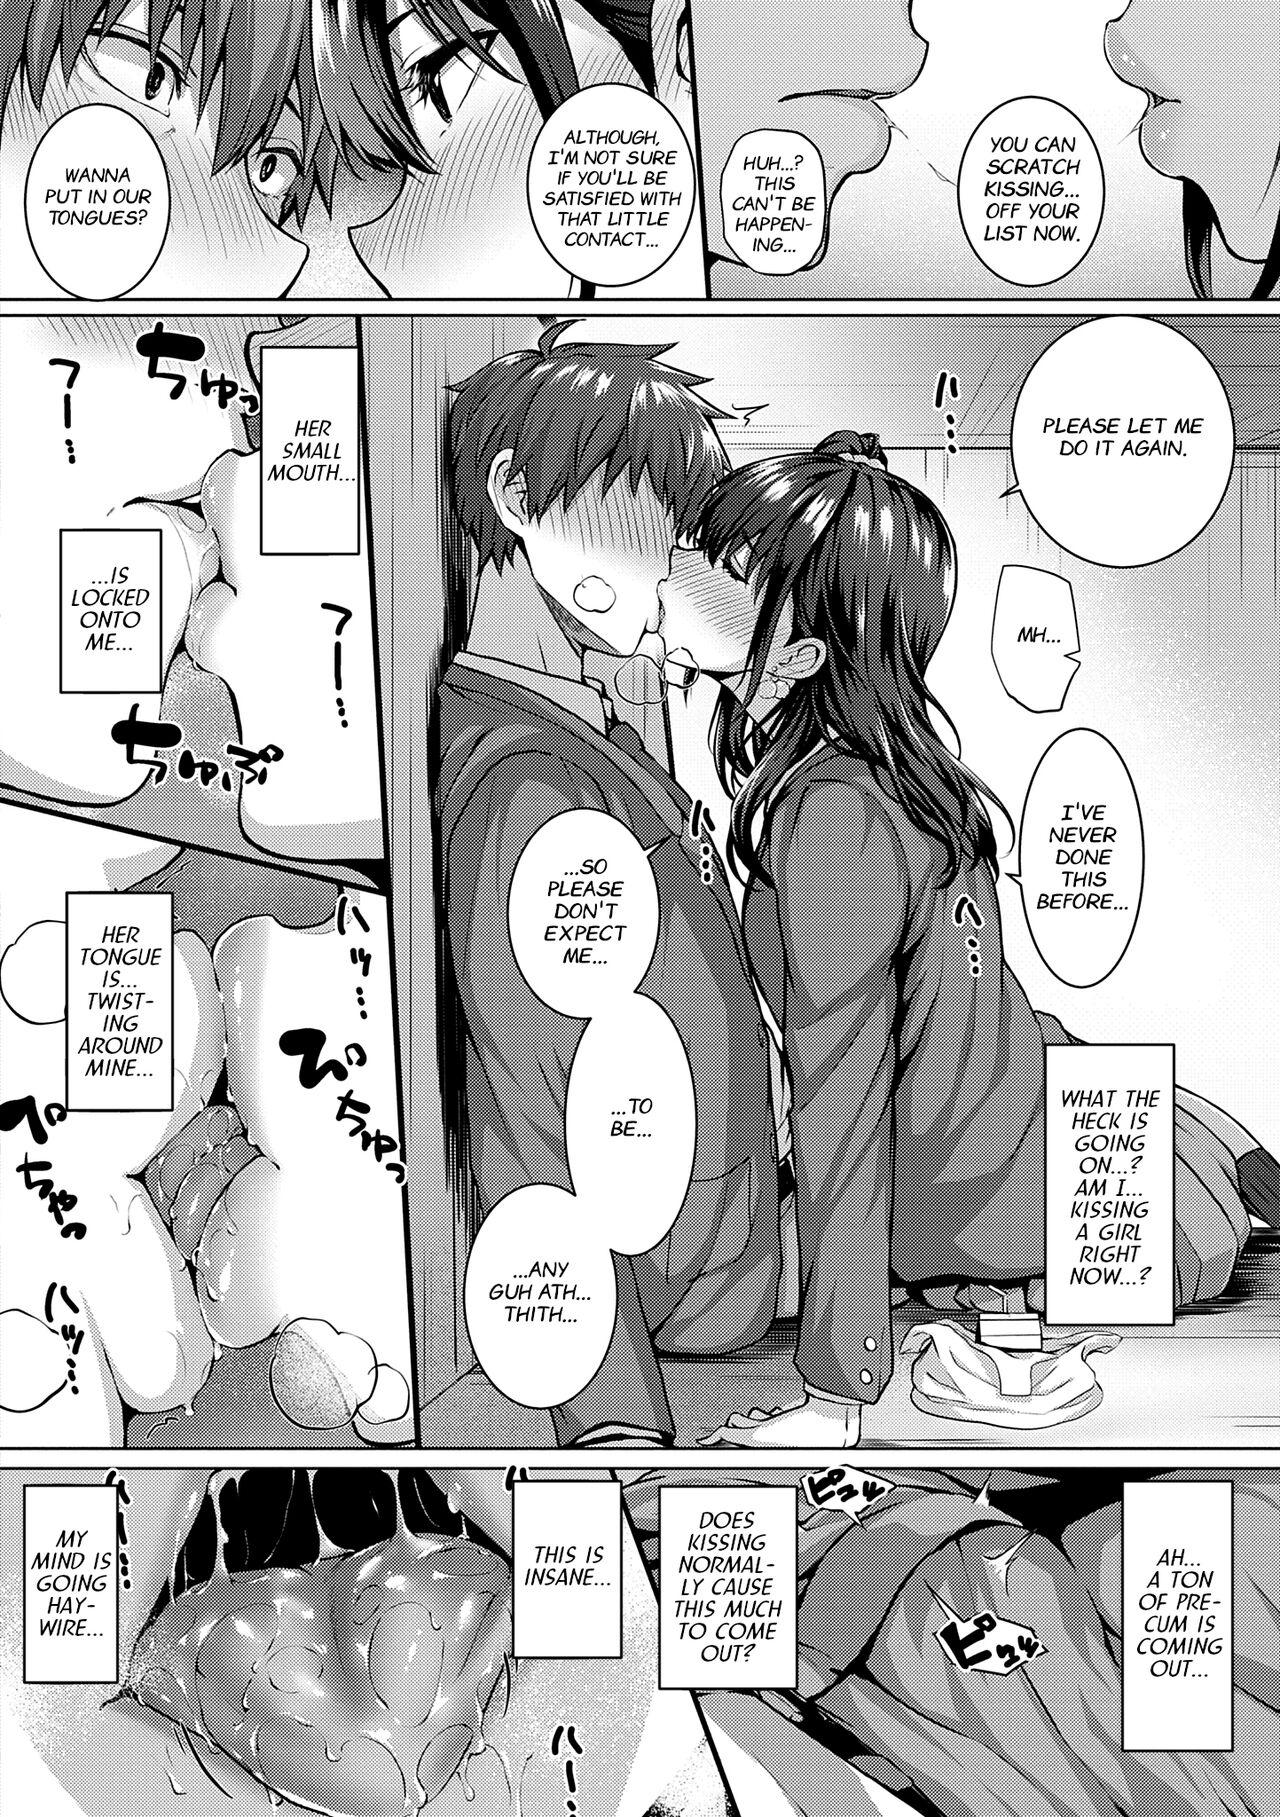 Selfie Flag Kaishuu wa Totsuzen ni | The Puzzle Pieces Are Suddenly Coming Together Amatuer - Page 8